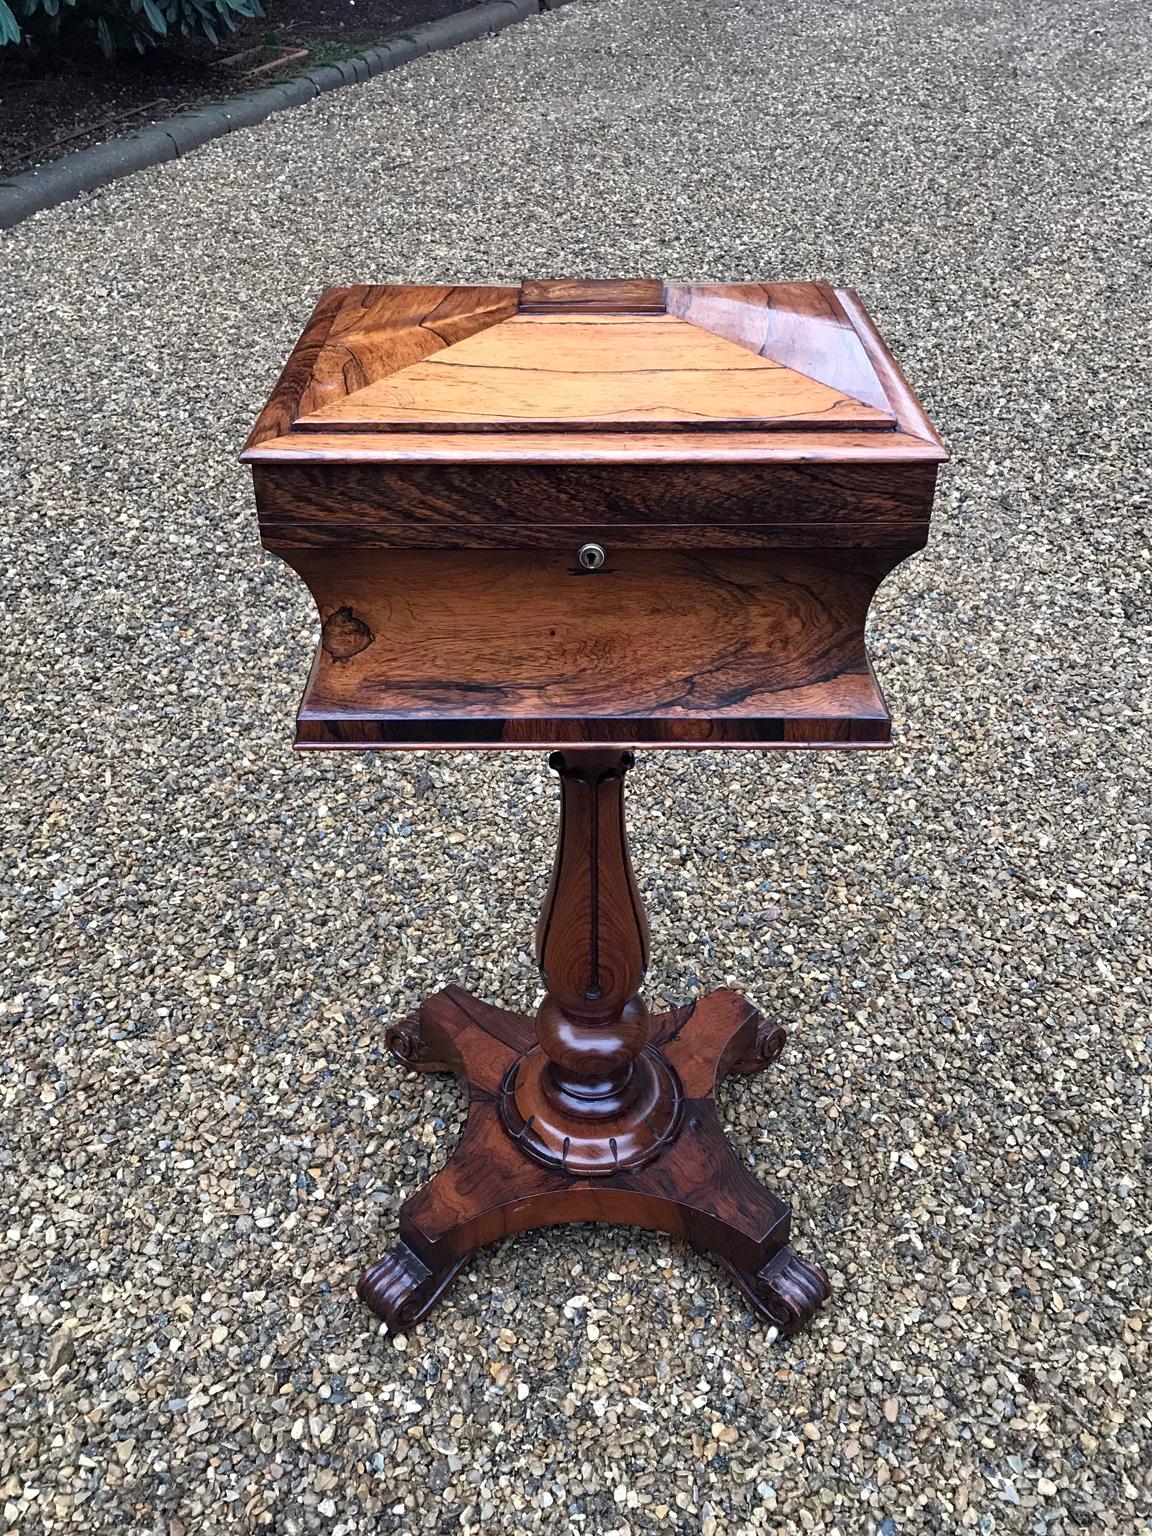 19th century William IV rosewood teapoy on stand with a solid rosewood column and shaped base on scroll feet.
Used as a jewelry box or sewing box,
circa 1830.
Dimensions:
Width 15 inches – 39 cms
Depth 13 inches – 33 cms
Height 31 inches – 80